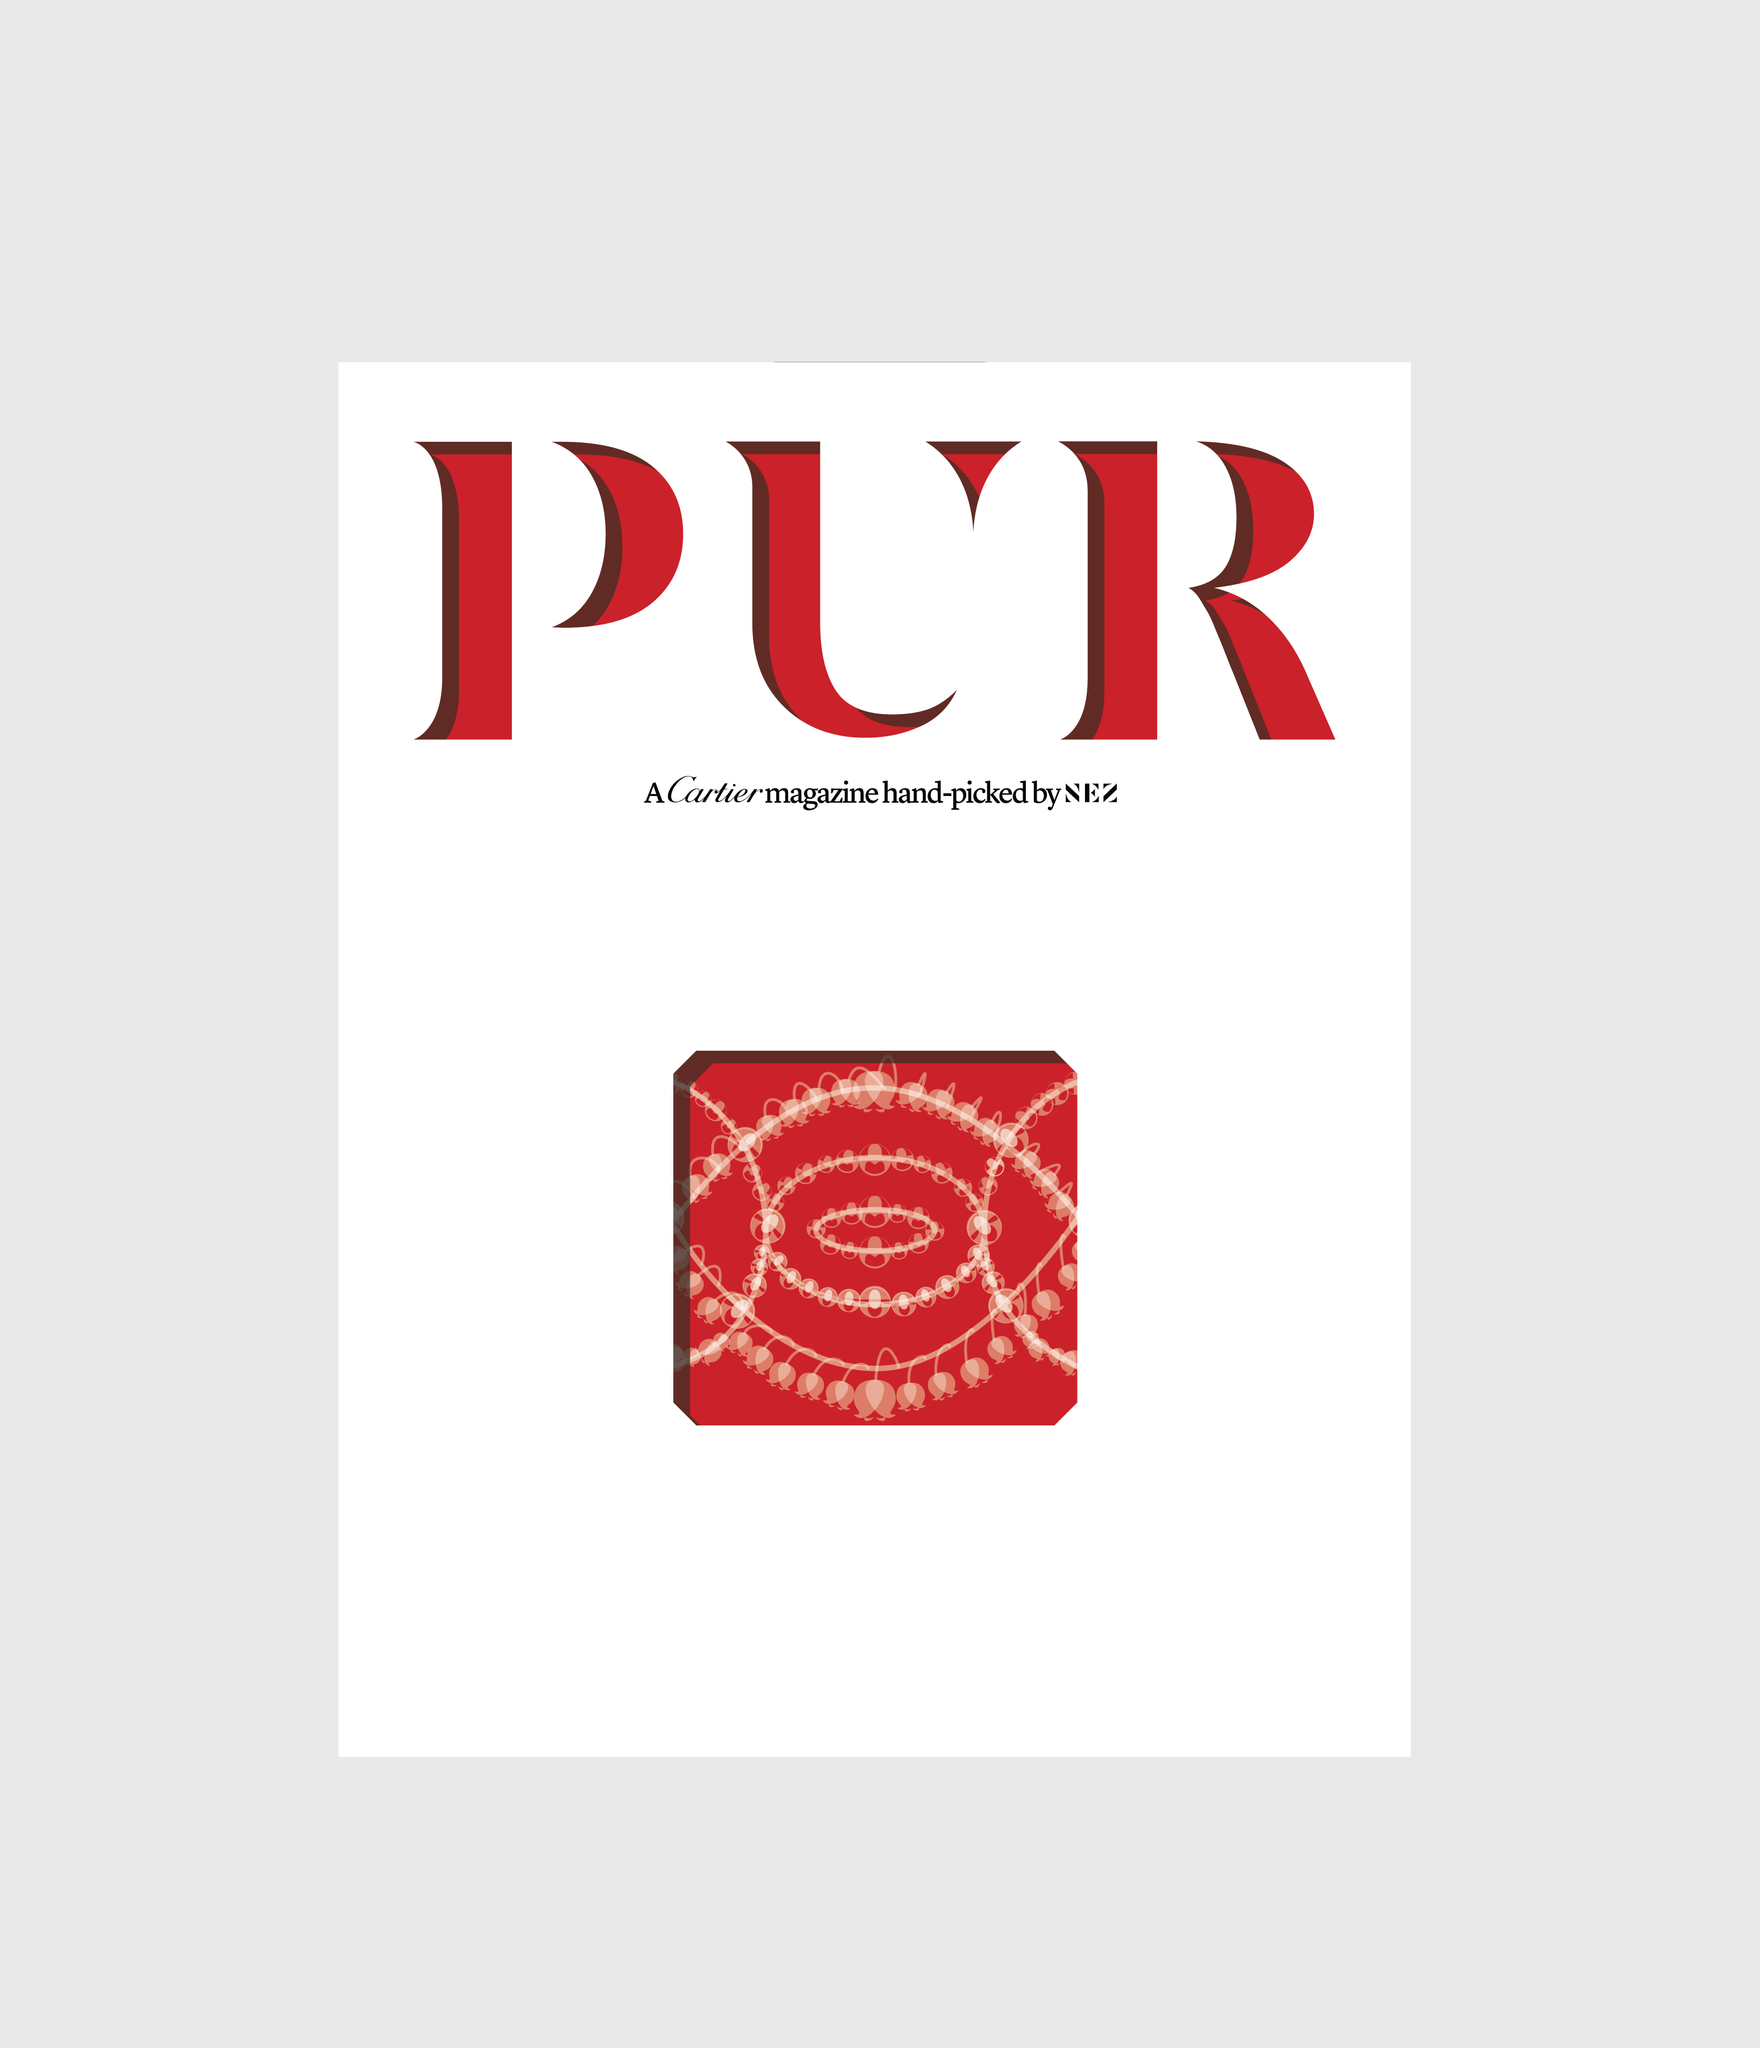 PUR A Cartier magazine hand-picked by Nez